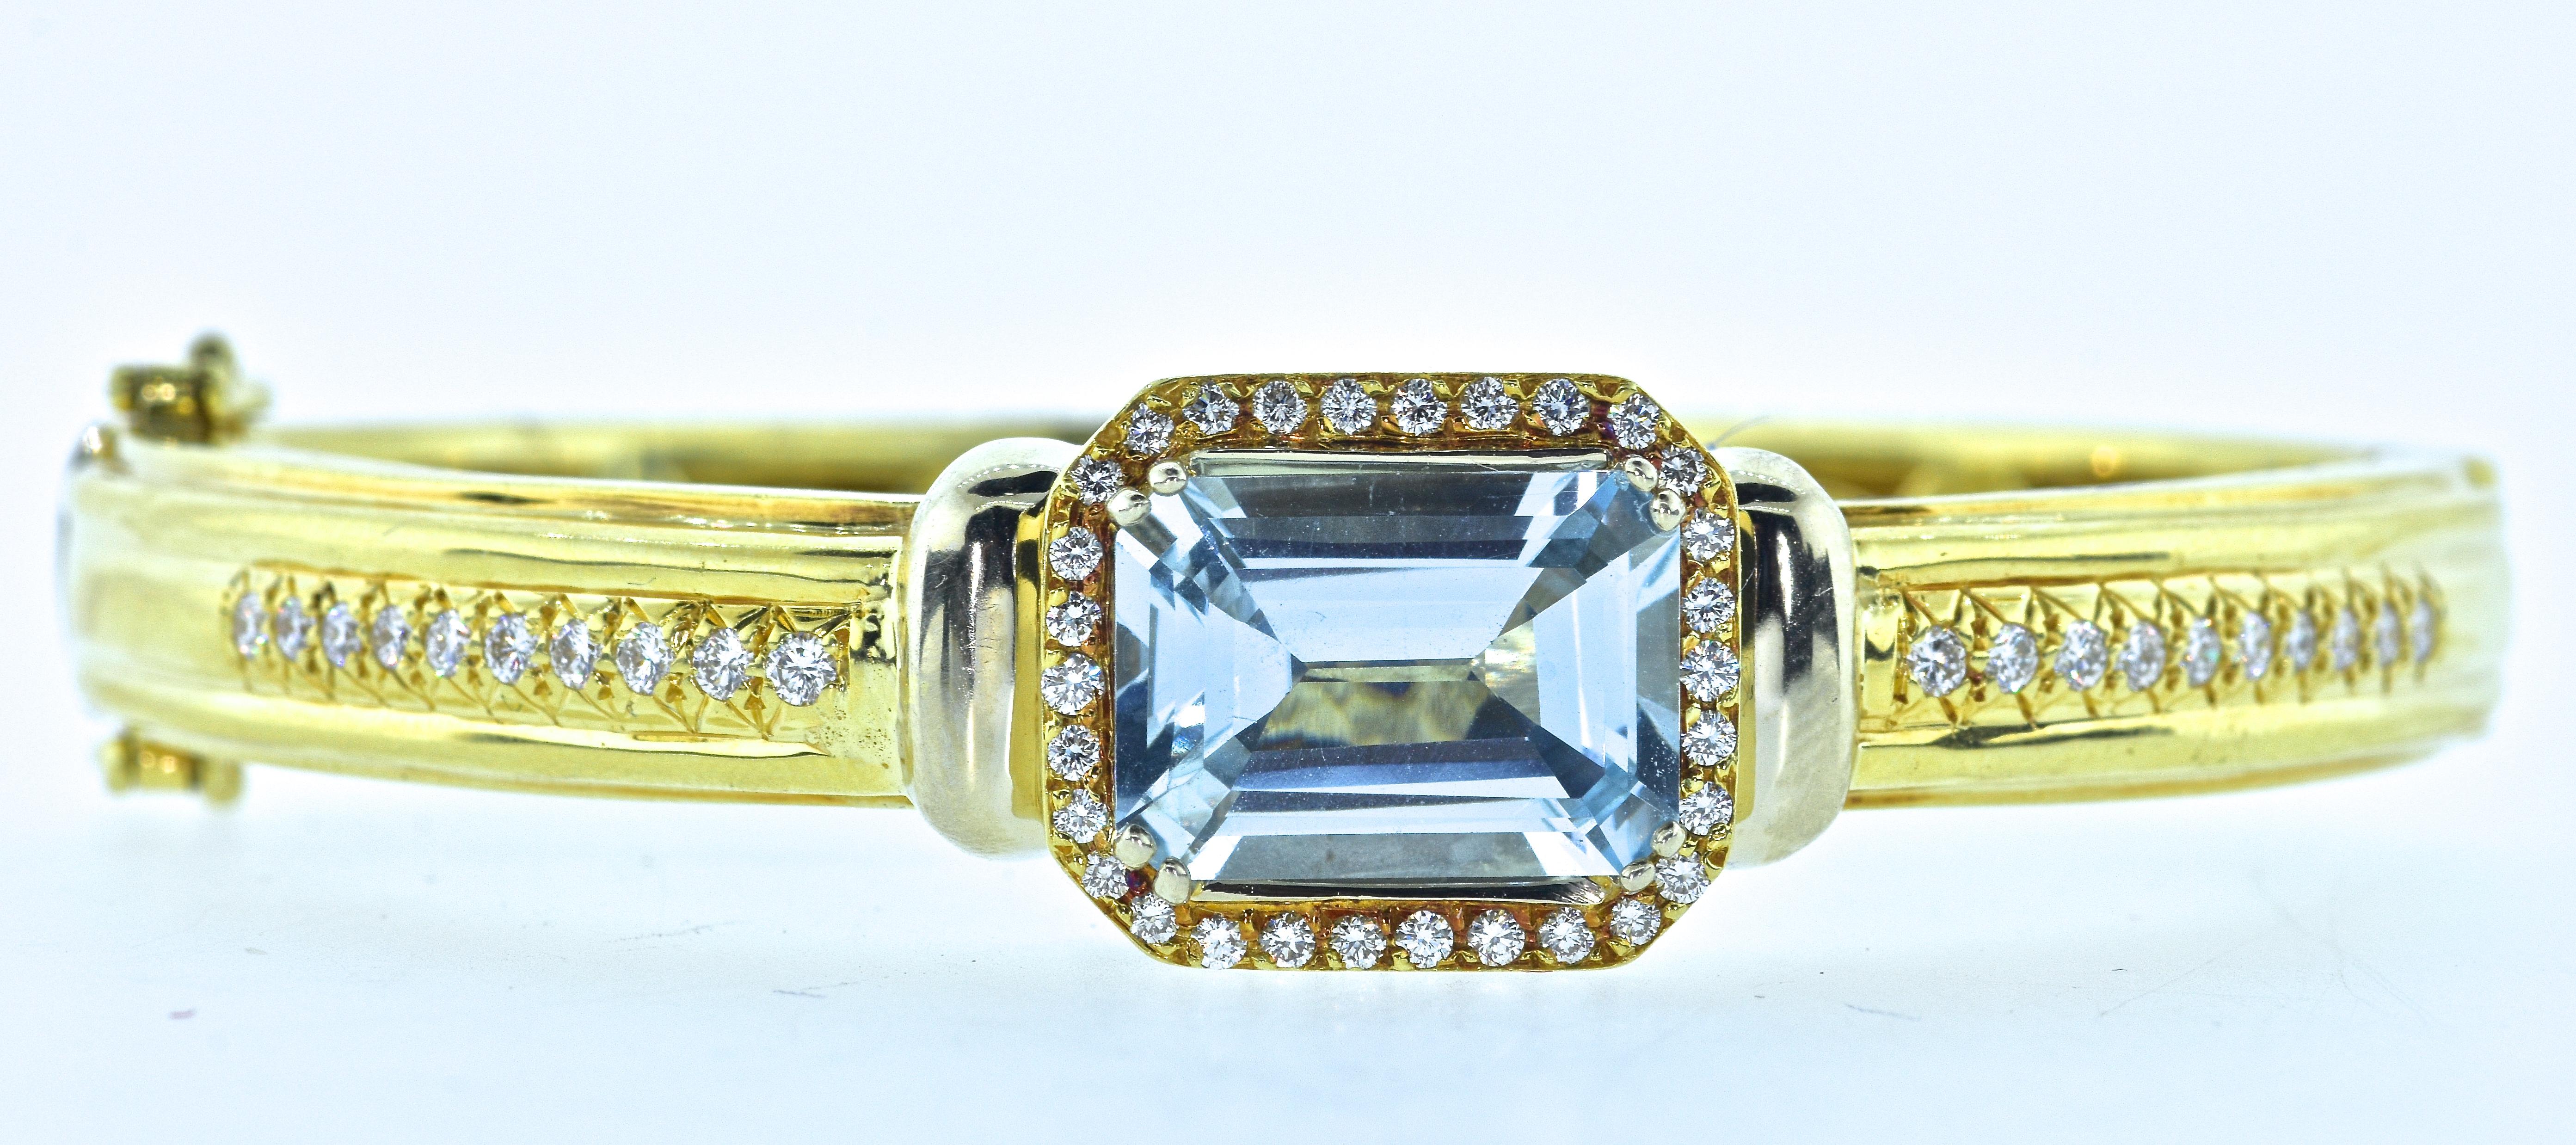 Hammerman Brothers diamond and aquamarine 18K yellow gold bangle bracelet.  The center natural bright blue aquamarine is emerald cut with dimensions of 13.96 mm. by 10.0 mm. by 6.2 mm., and estimated to weigh approximately 6.0 cts.  This aquamarine